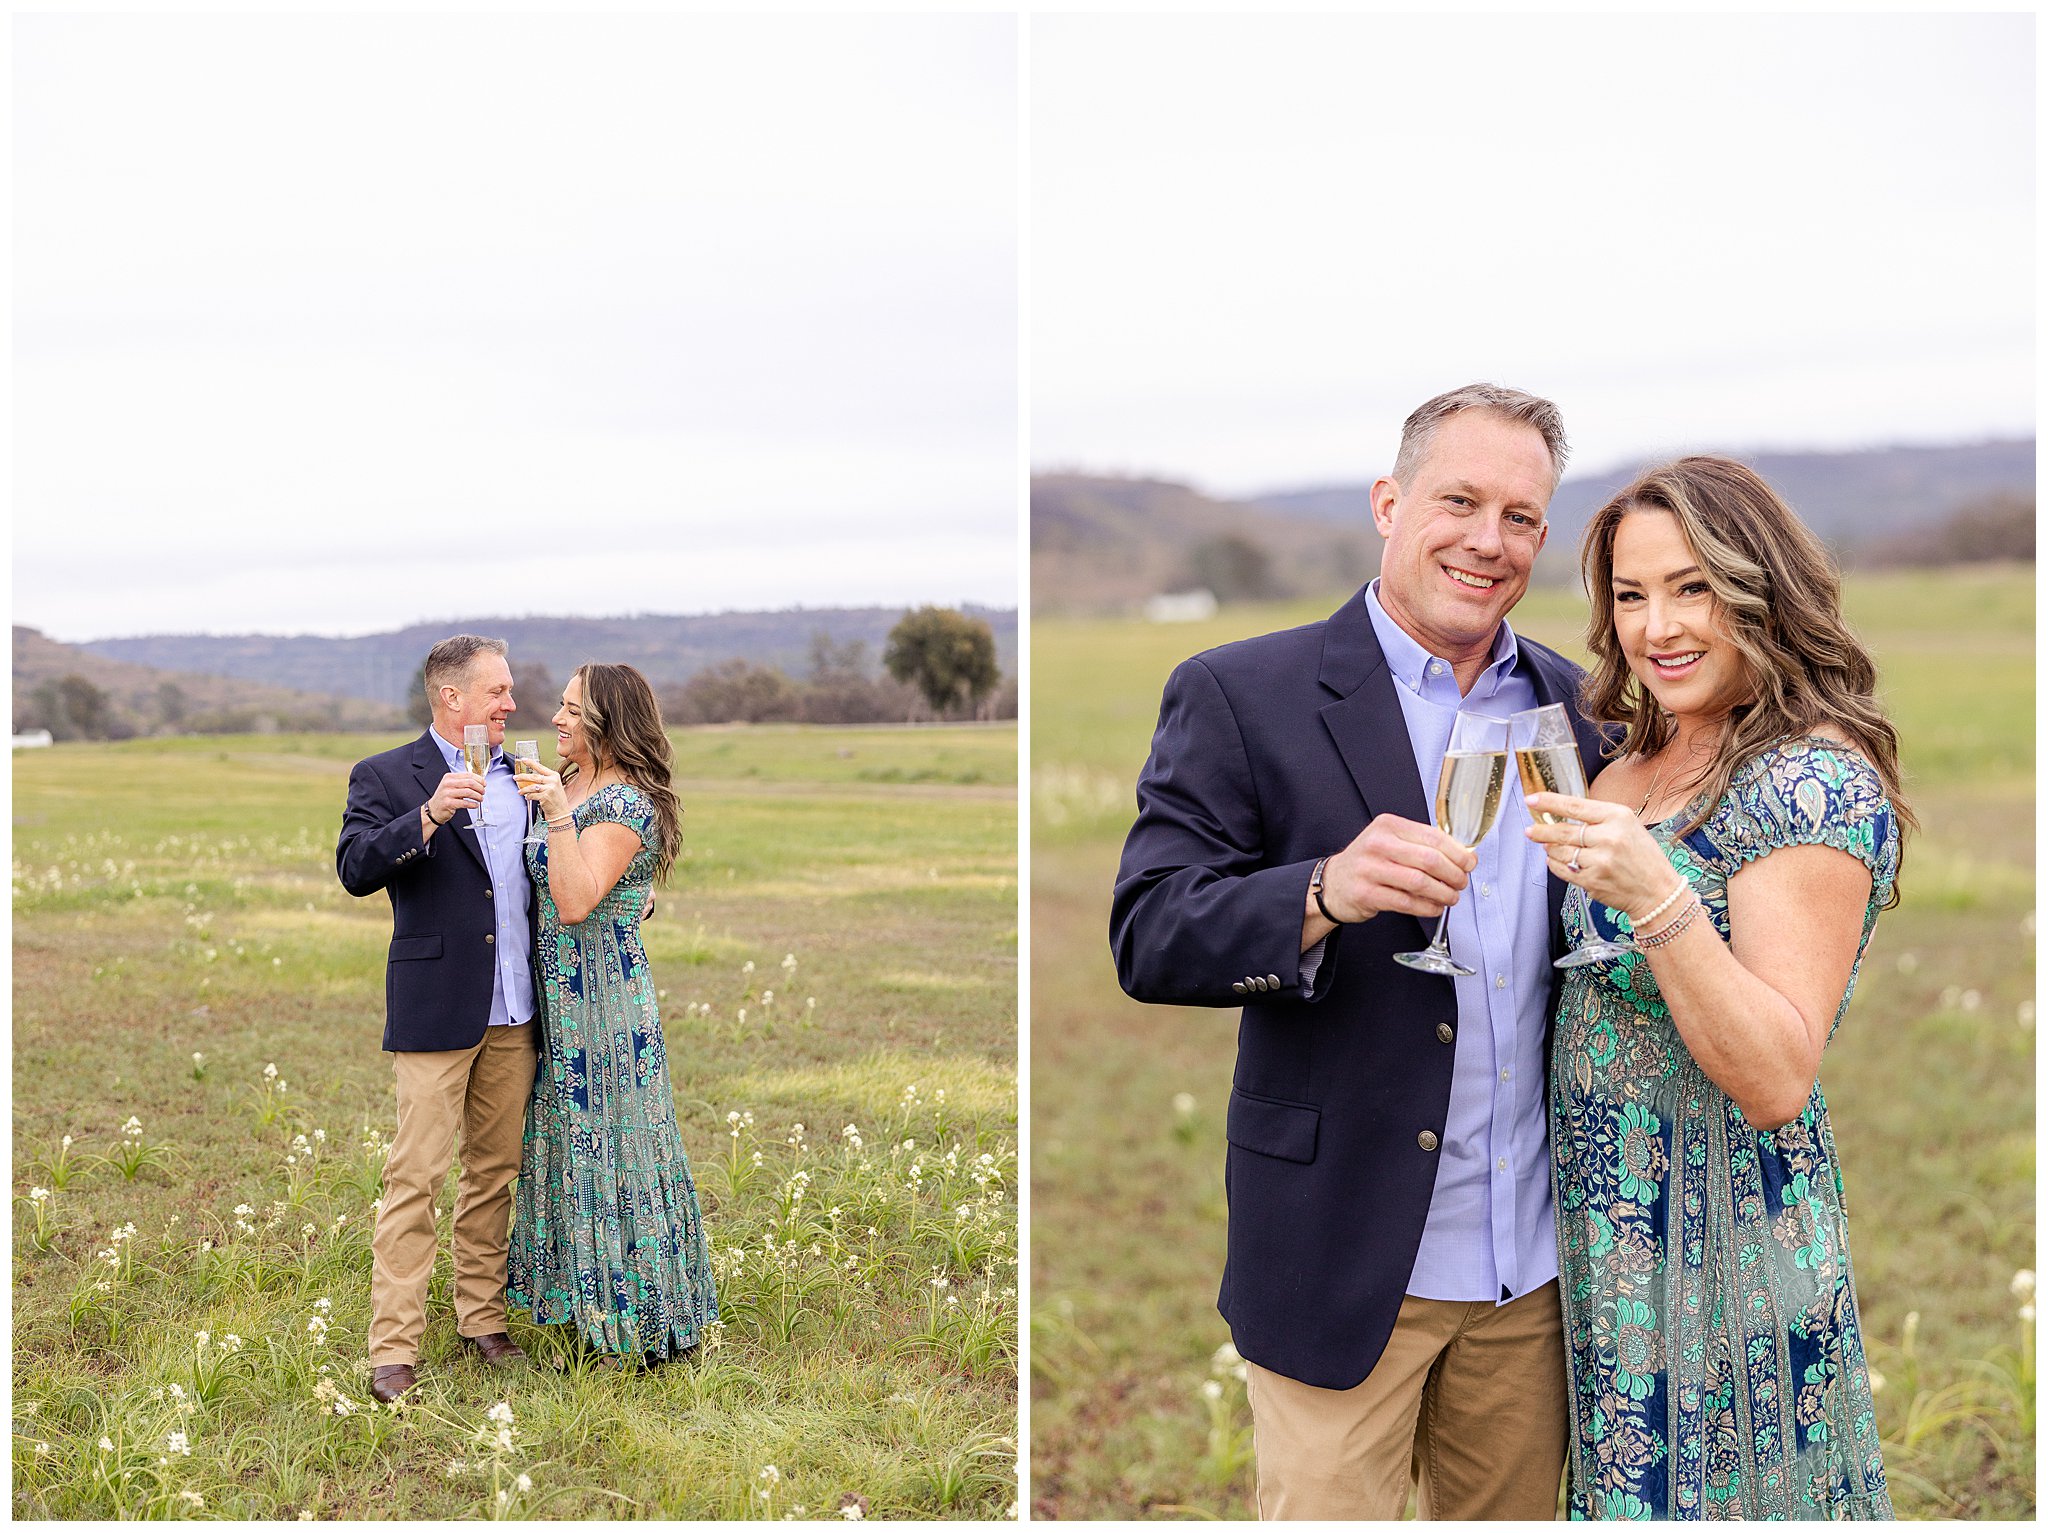 Upper Bidwell Park Engagement Session Chico CA Trail Wildflowers Champagne,